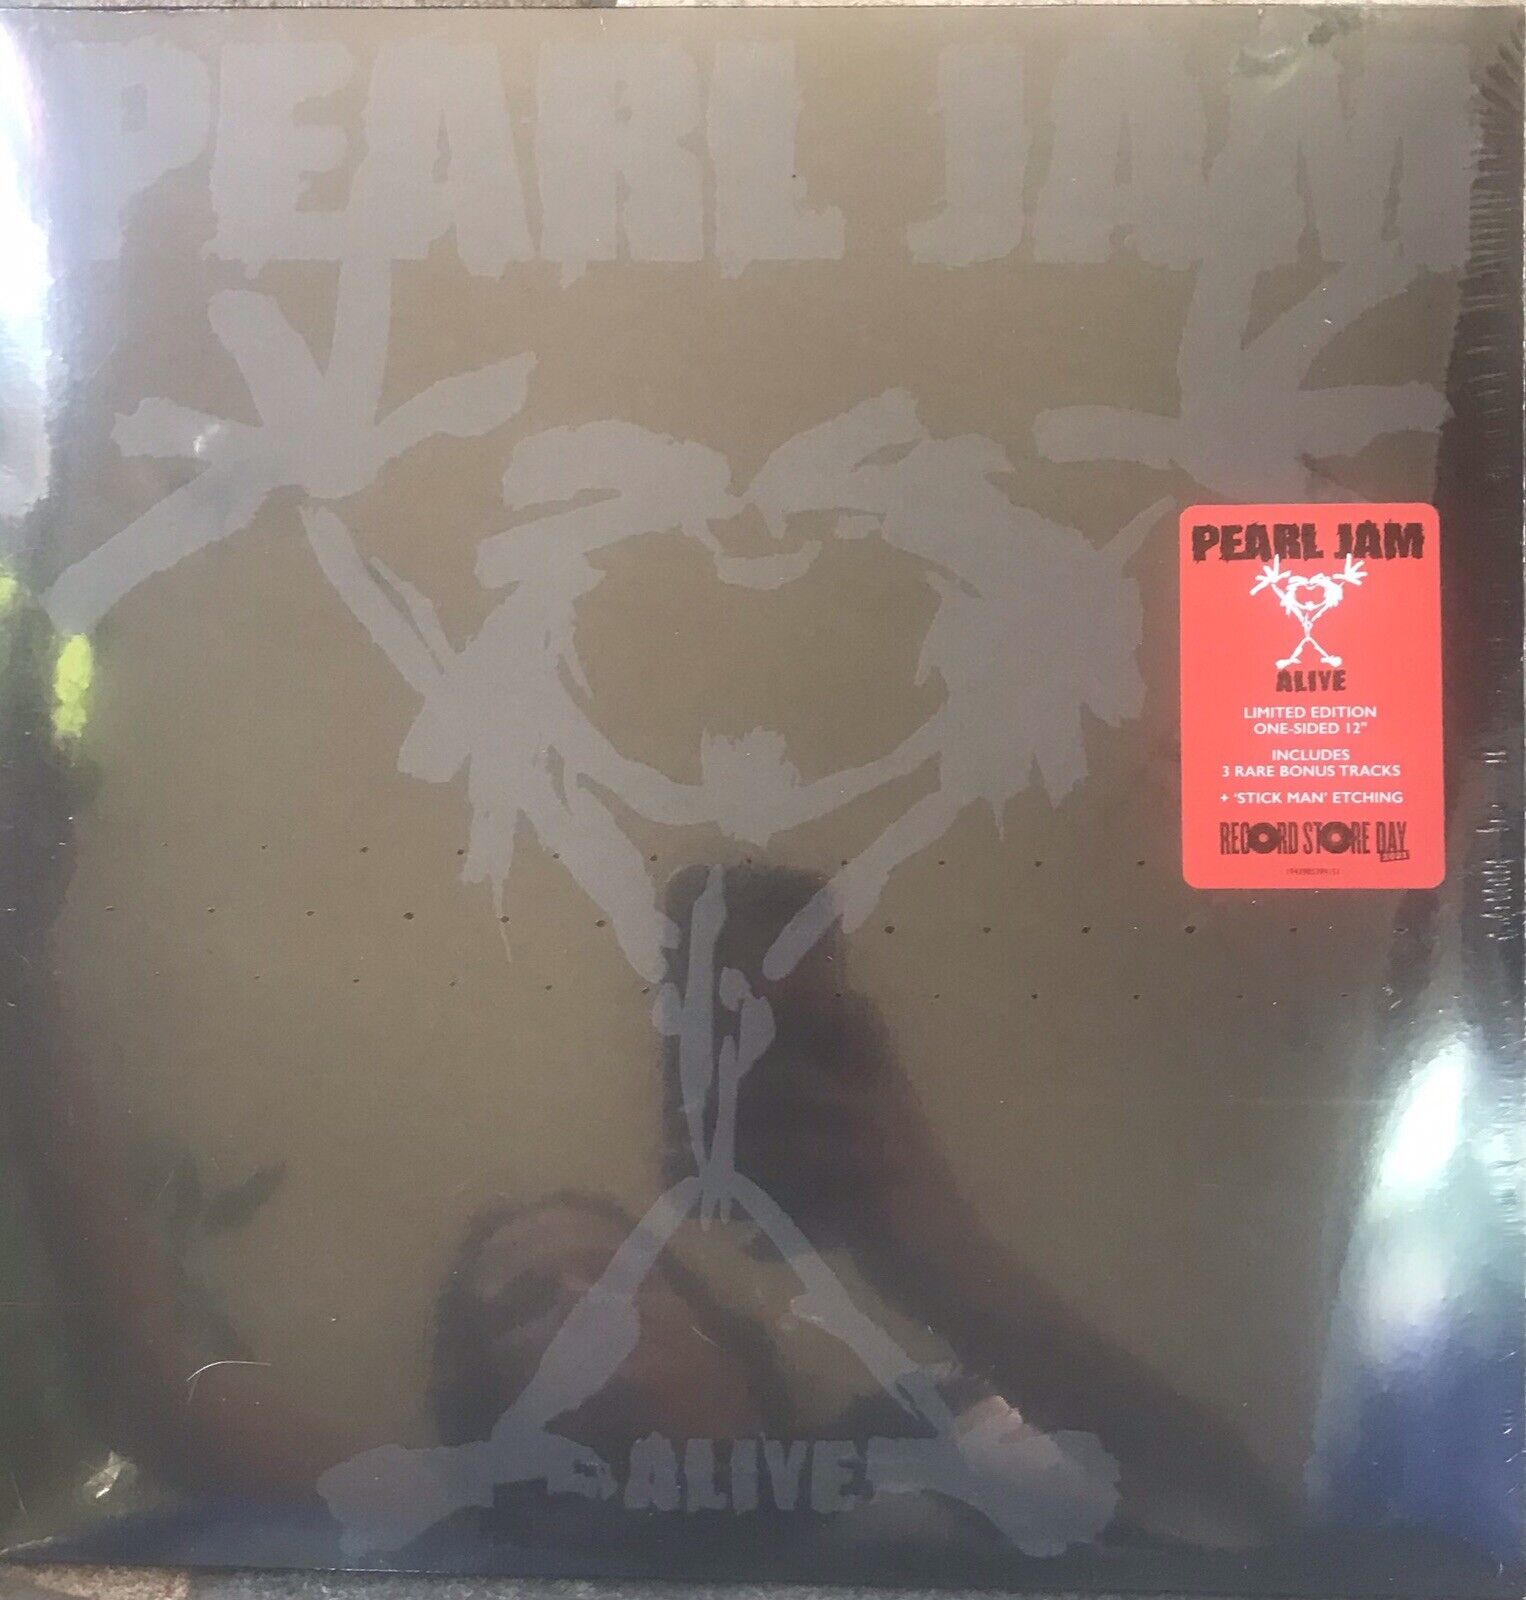 PEARL JAM ALIVE 12" VINYL - RECORD STORE DAY RSD 2021 LIMITED EDITION